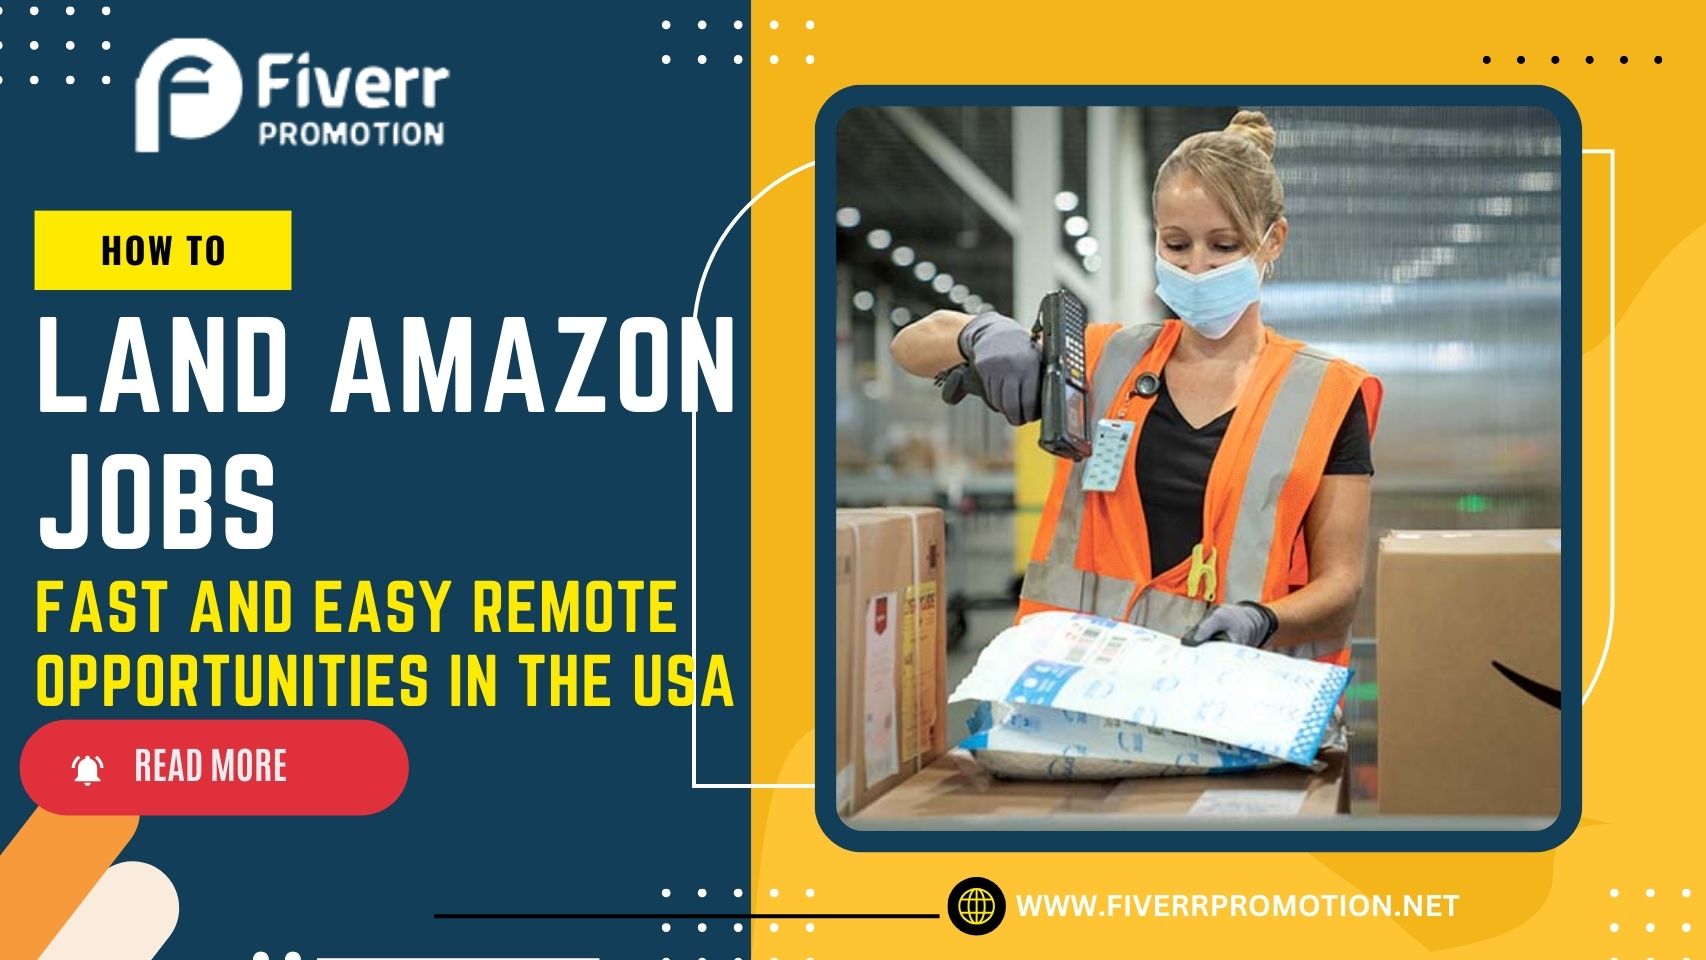 How to Land Amazon Jobs: Fast and Easy Remote Opportunities in the USA